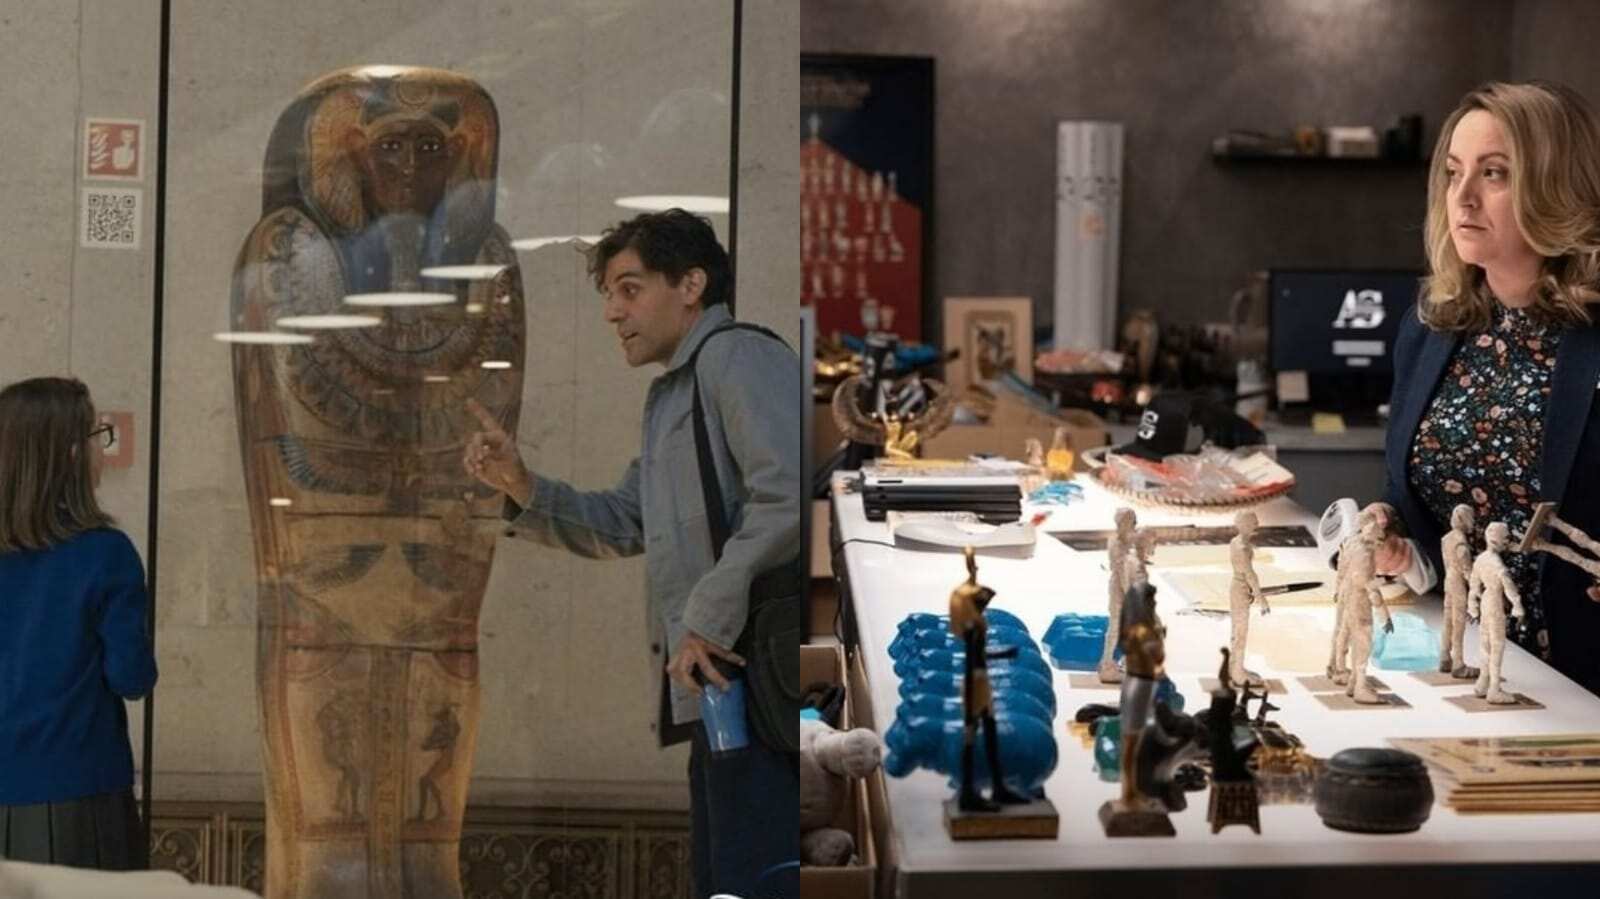 Egyptian exhibits in museum made from scratch 